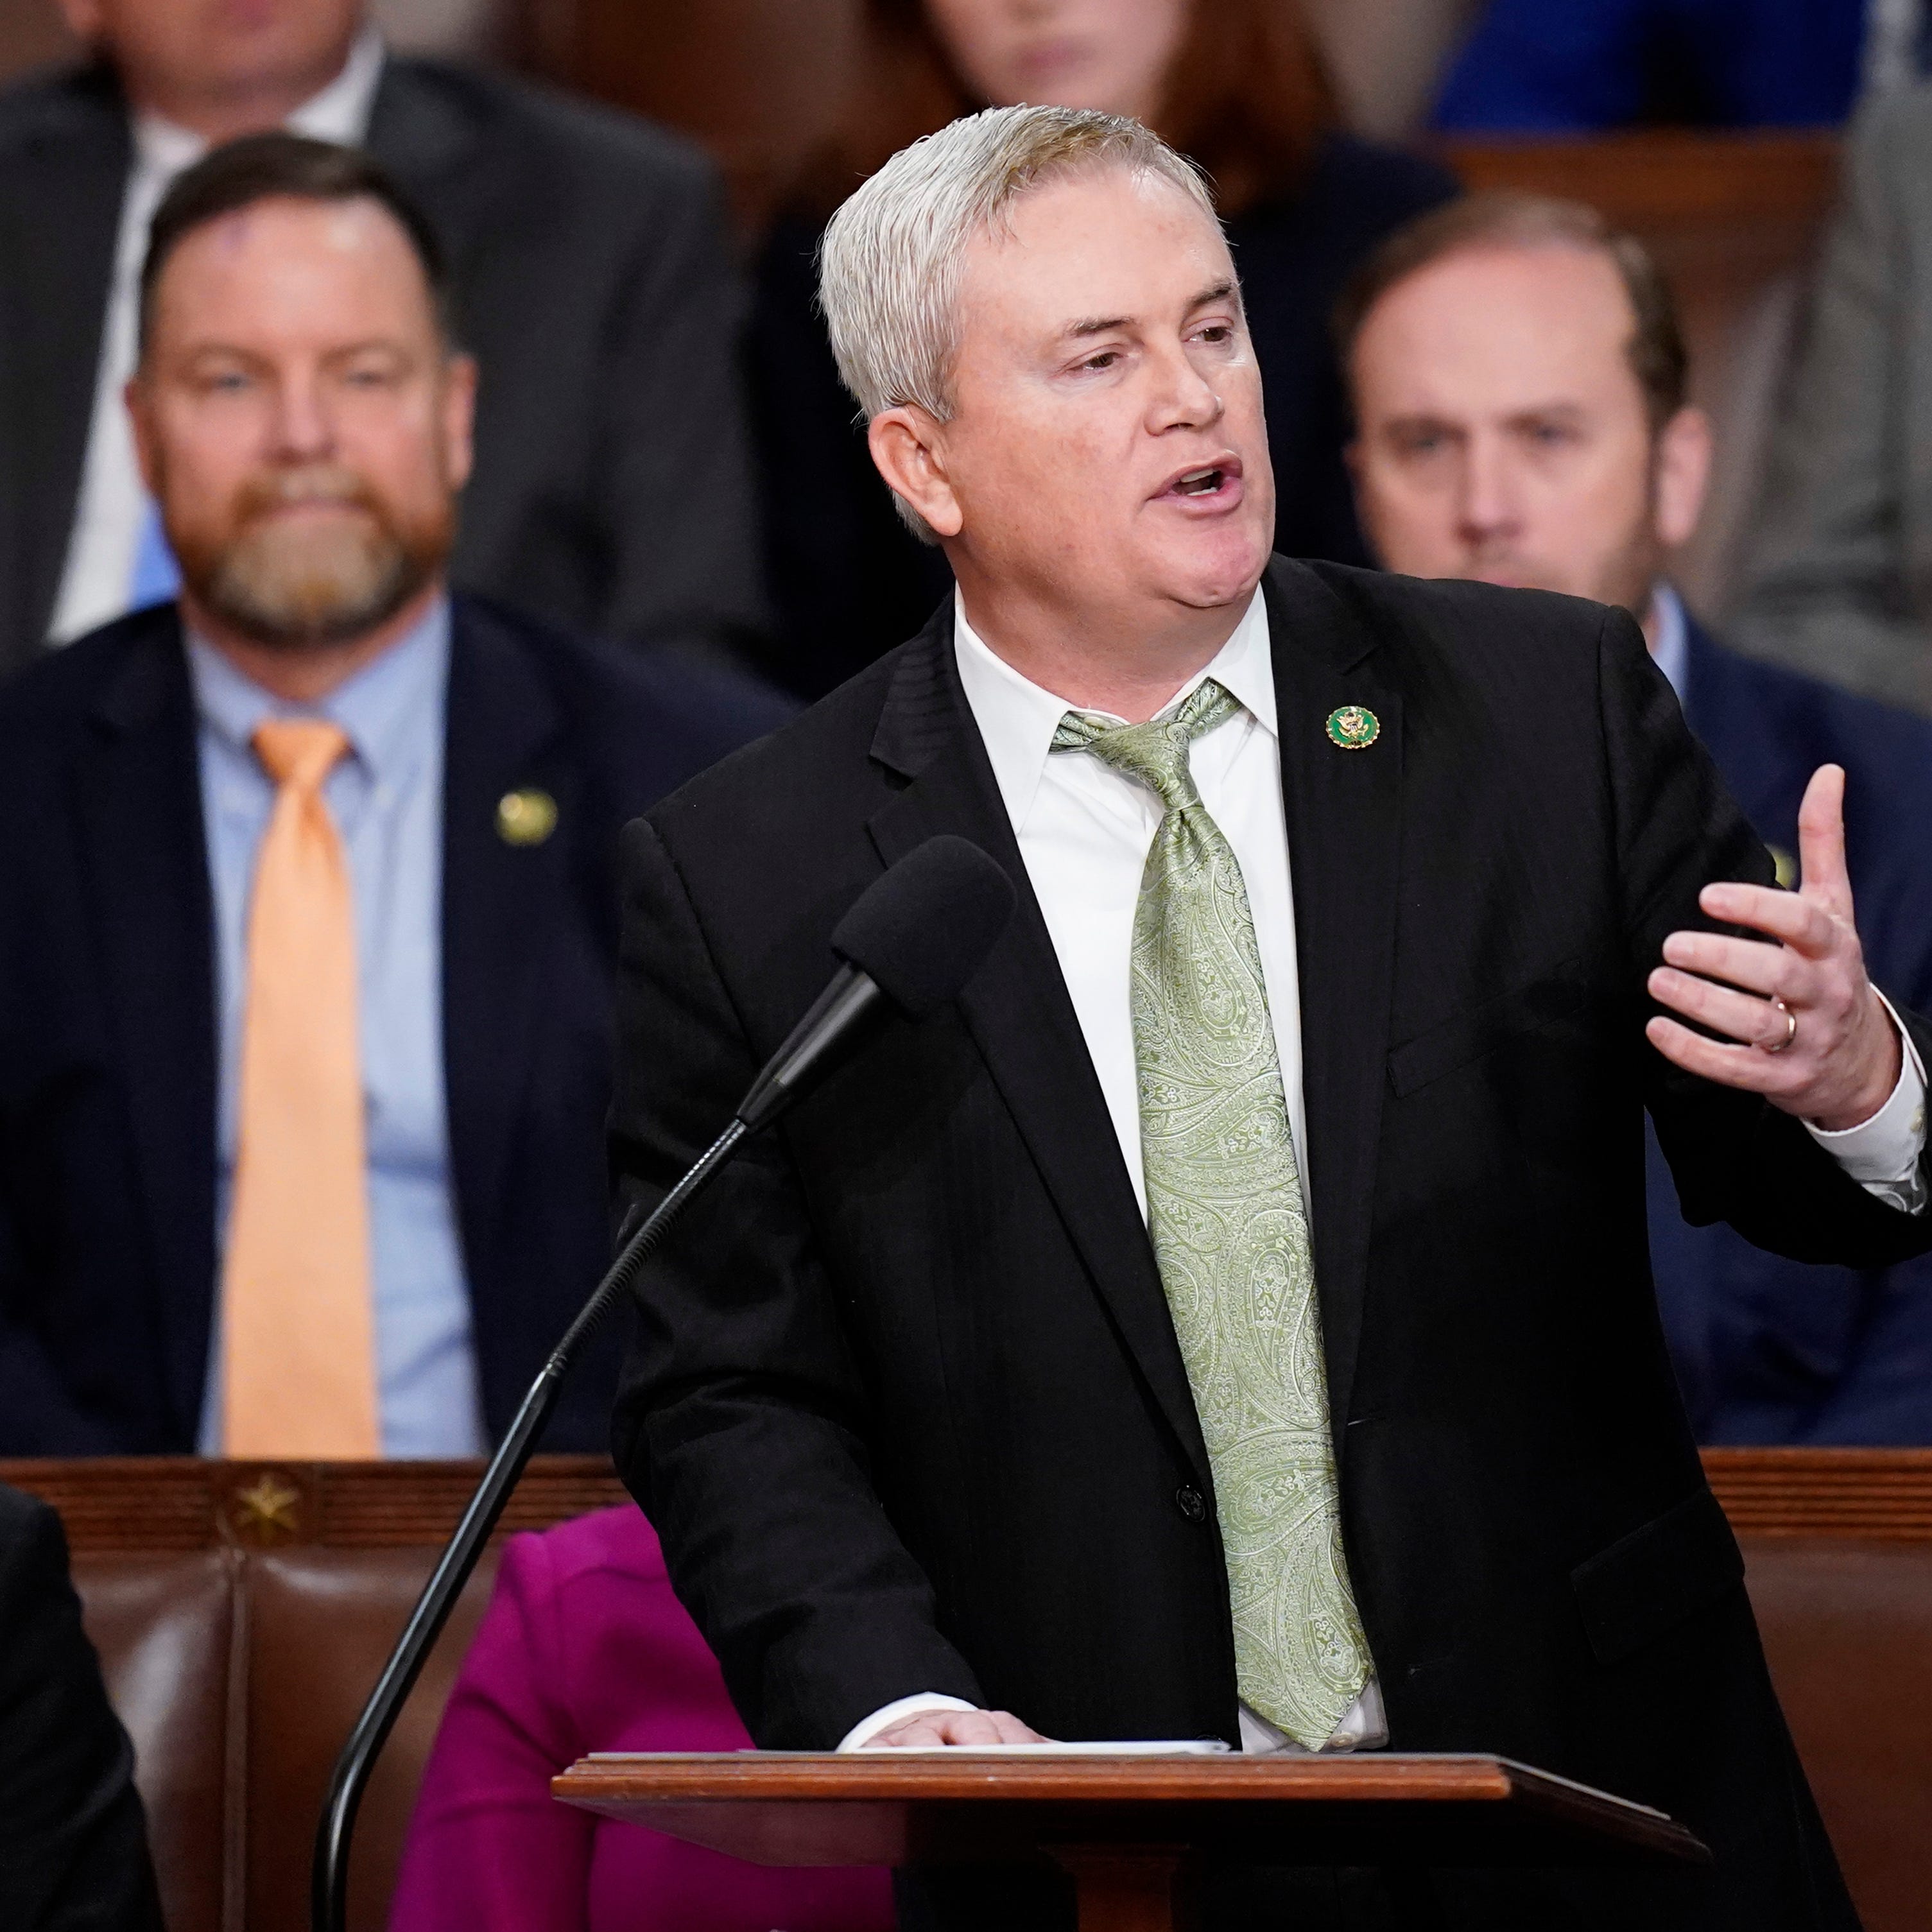 Rep. James Comer, R-Ky., nominates Rep. Kevin McCarthy, R-Calif., for a 13th round of voting in the House chamber as the House meets for the fourth day to elect a speaker and convene the 118th Congress in Washington Friday, Jan. 6, 2023.